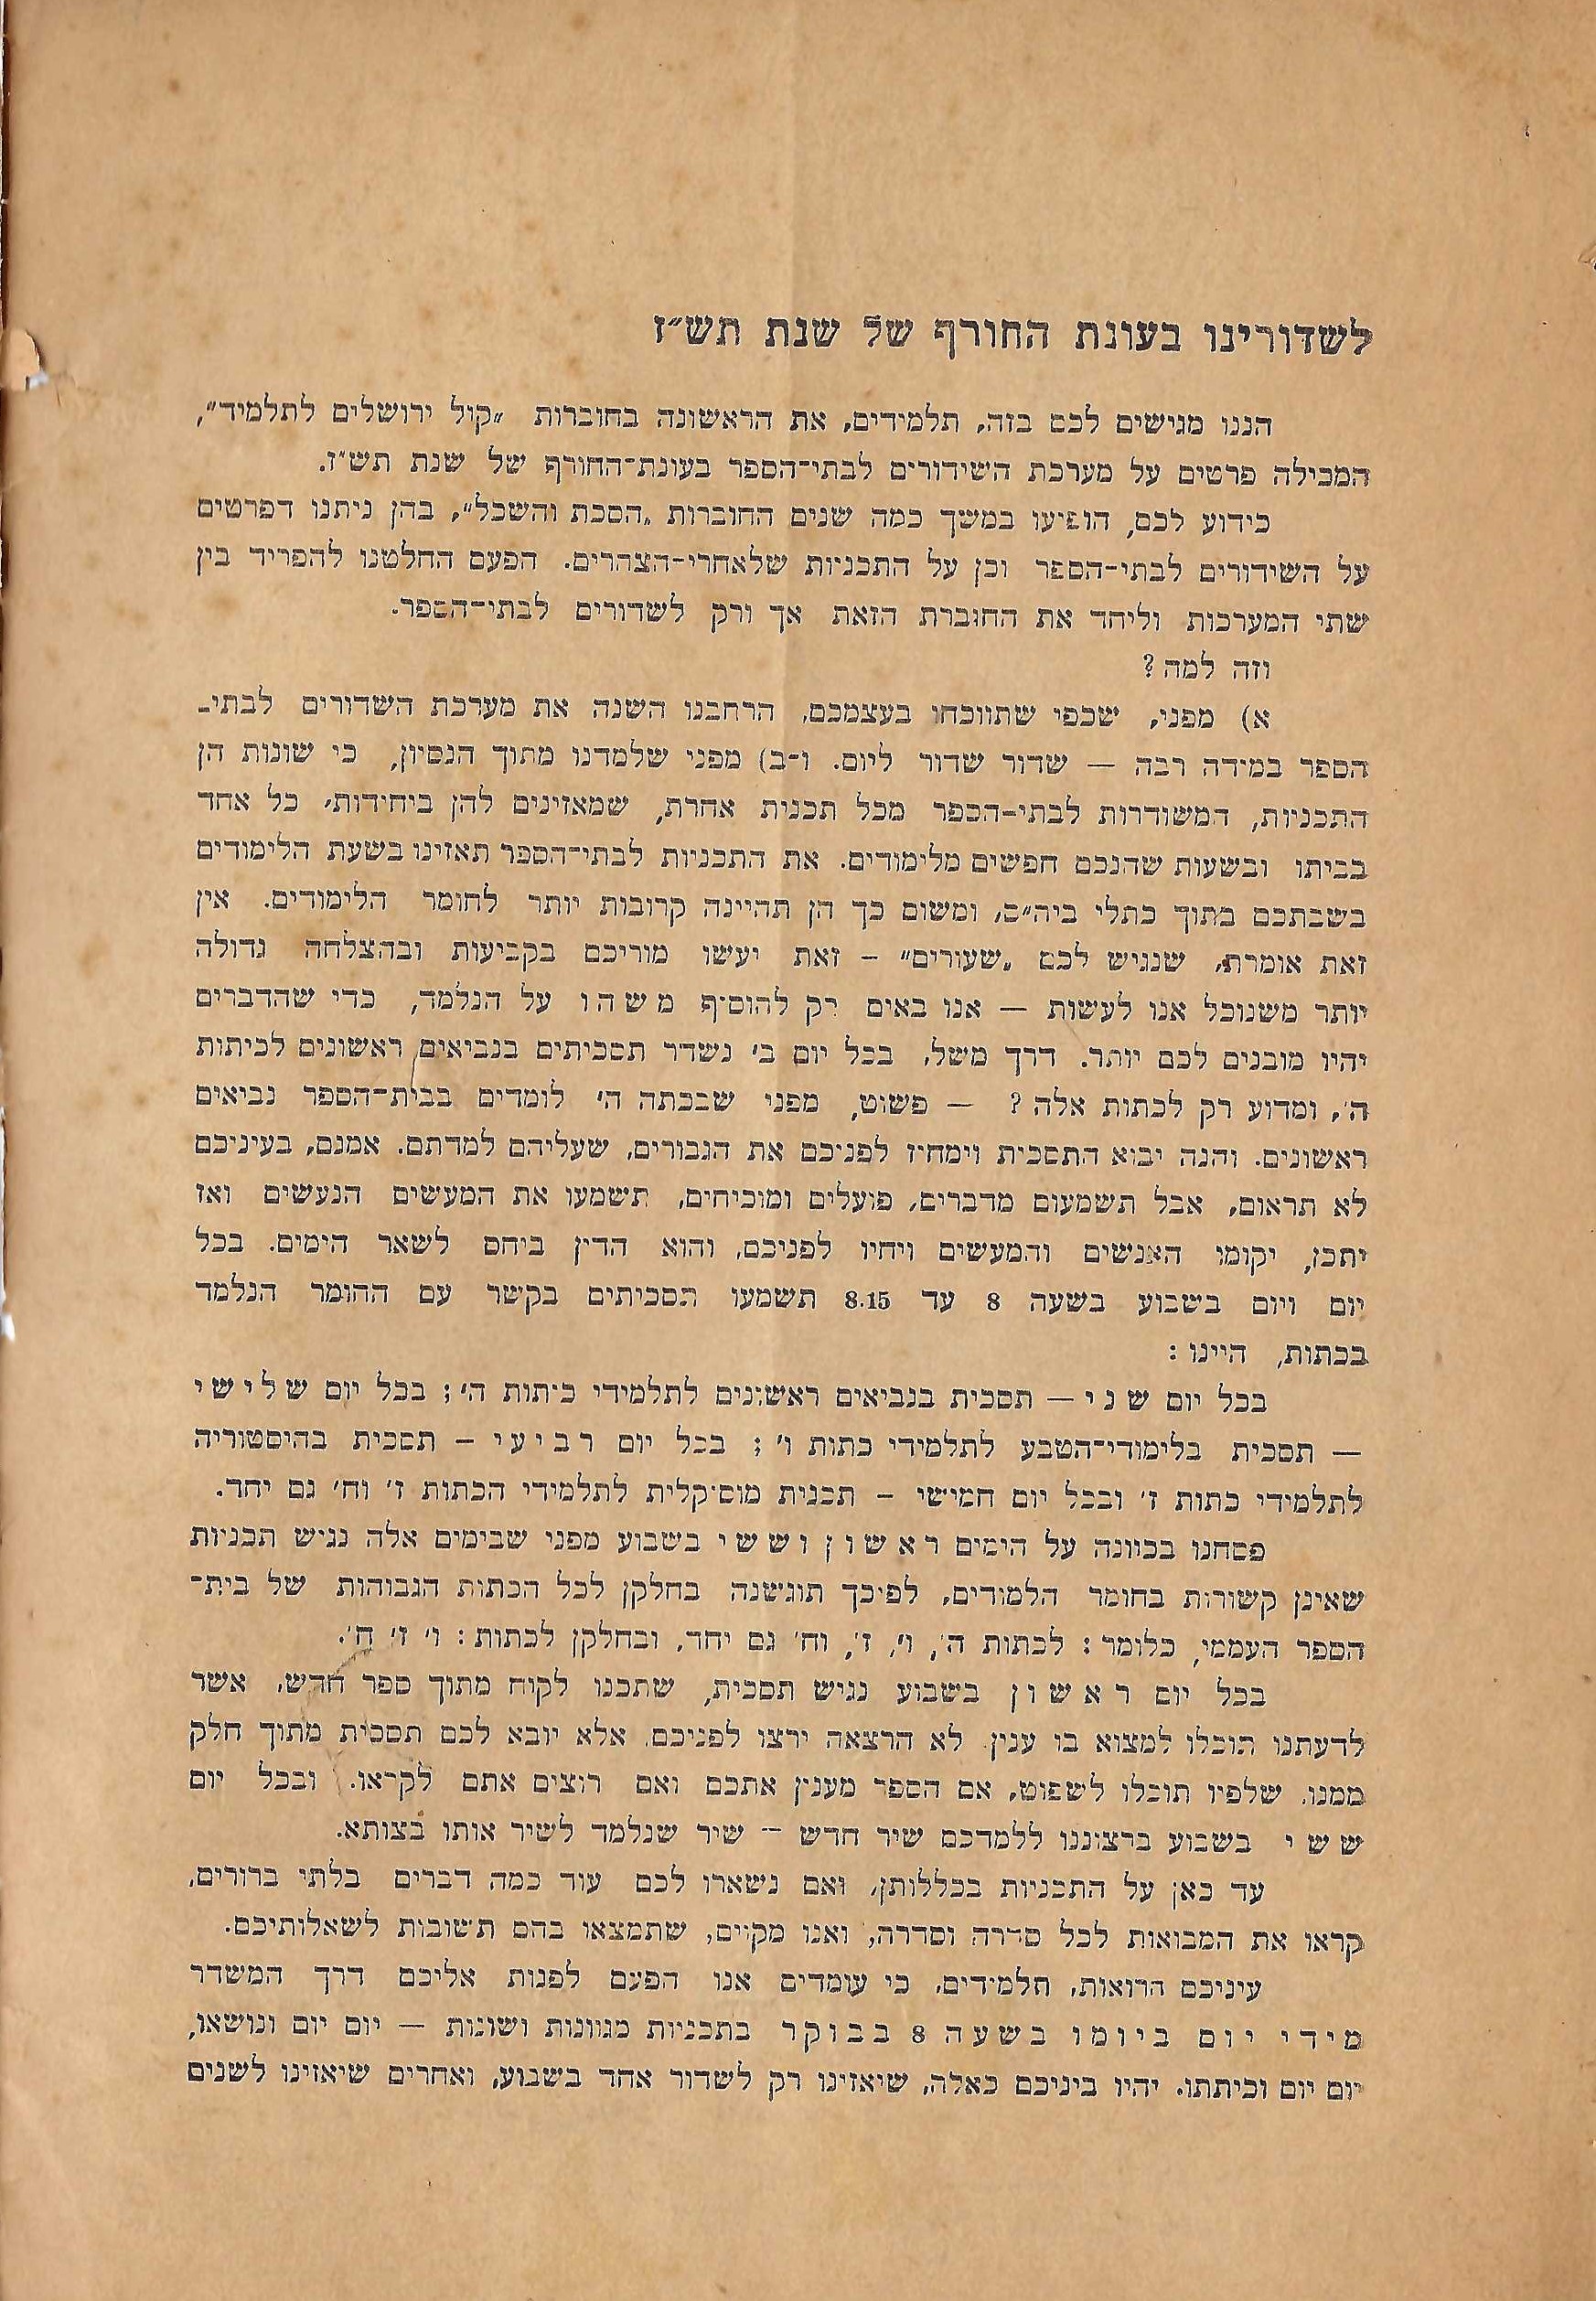   Photo: page 2